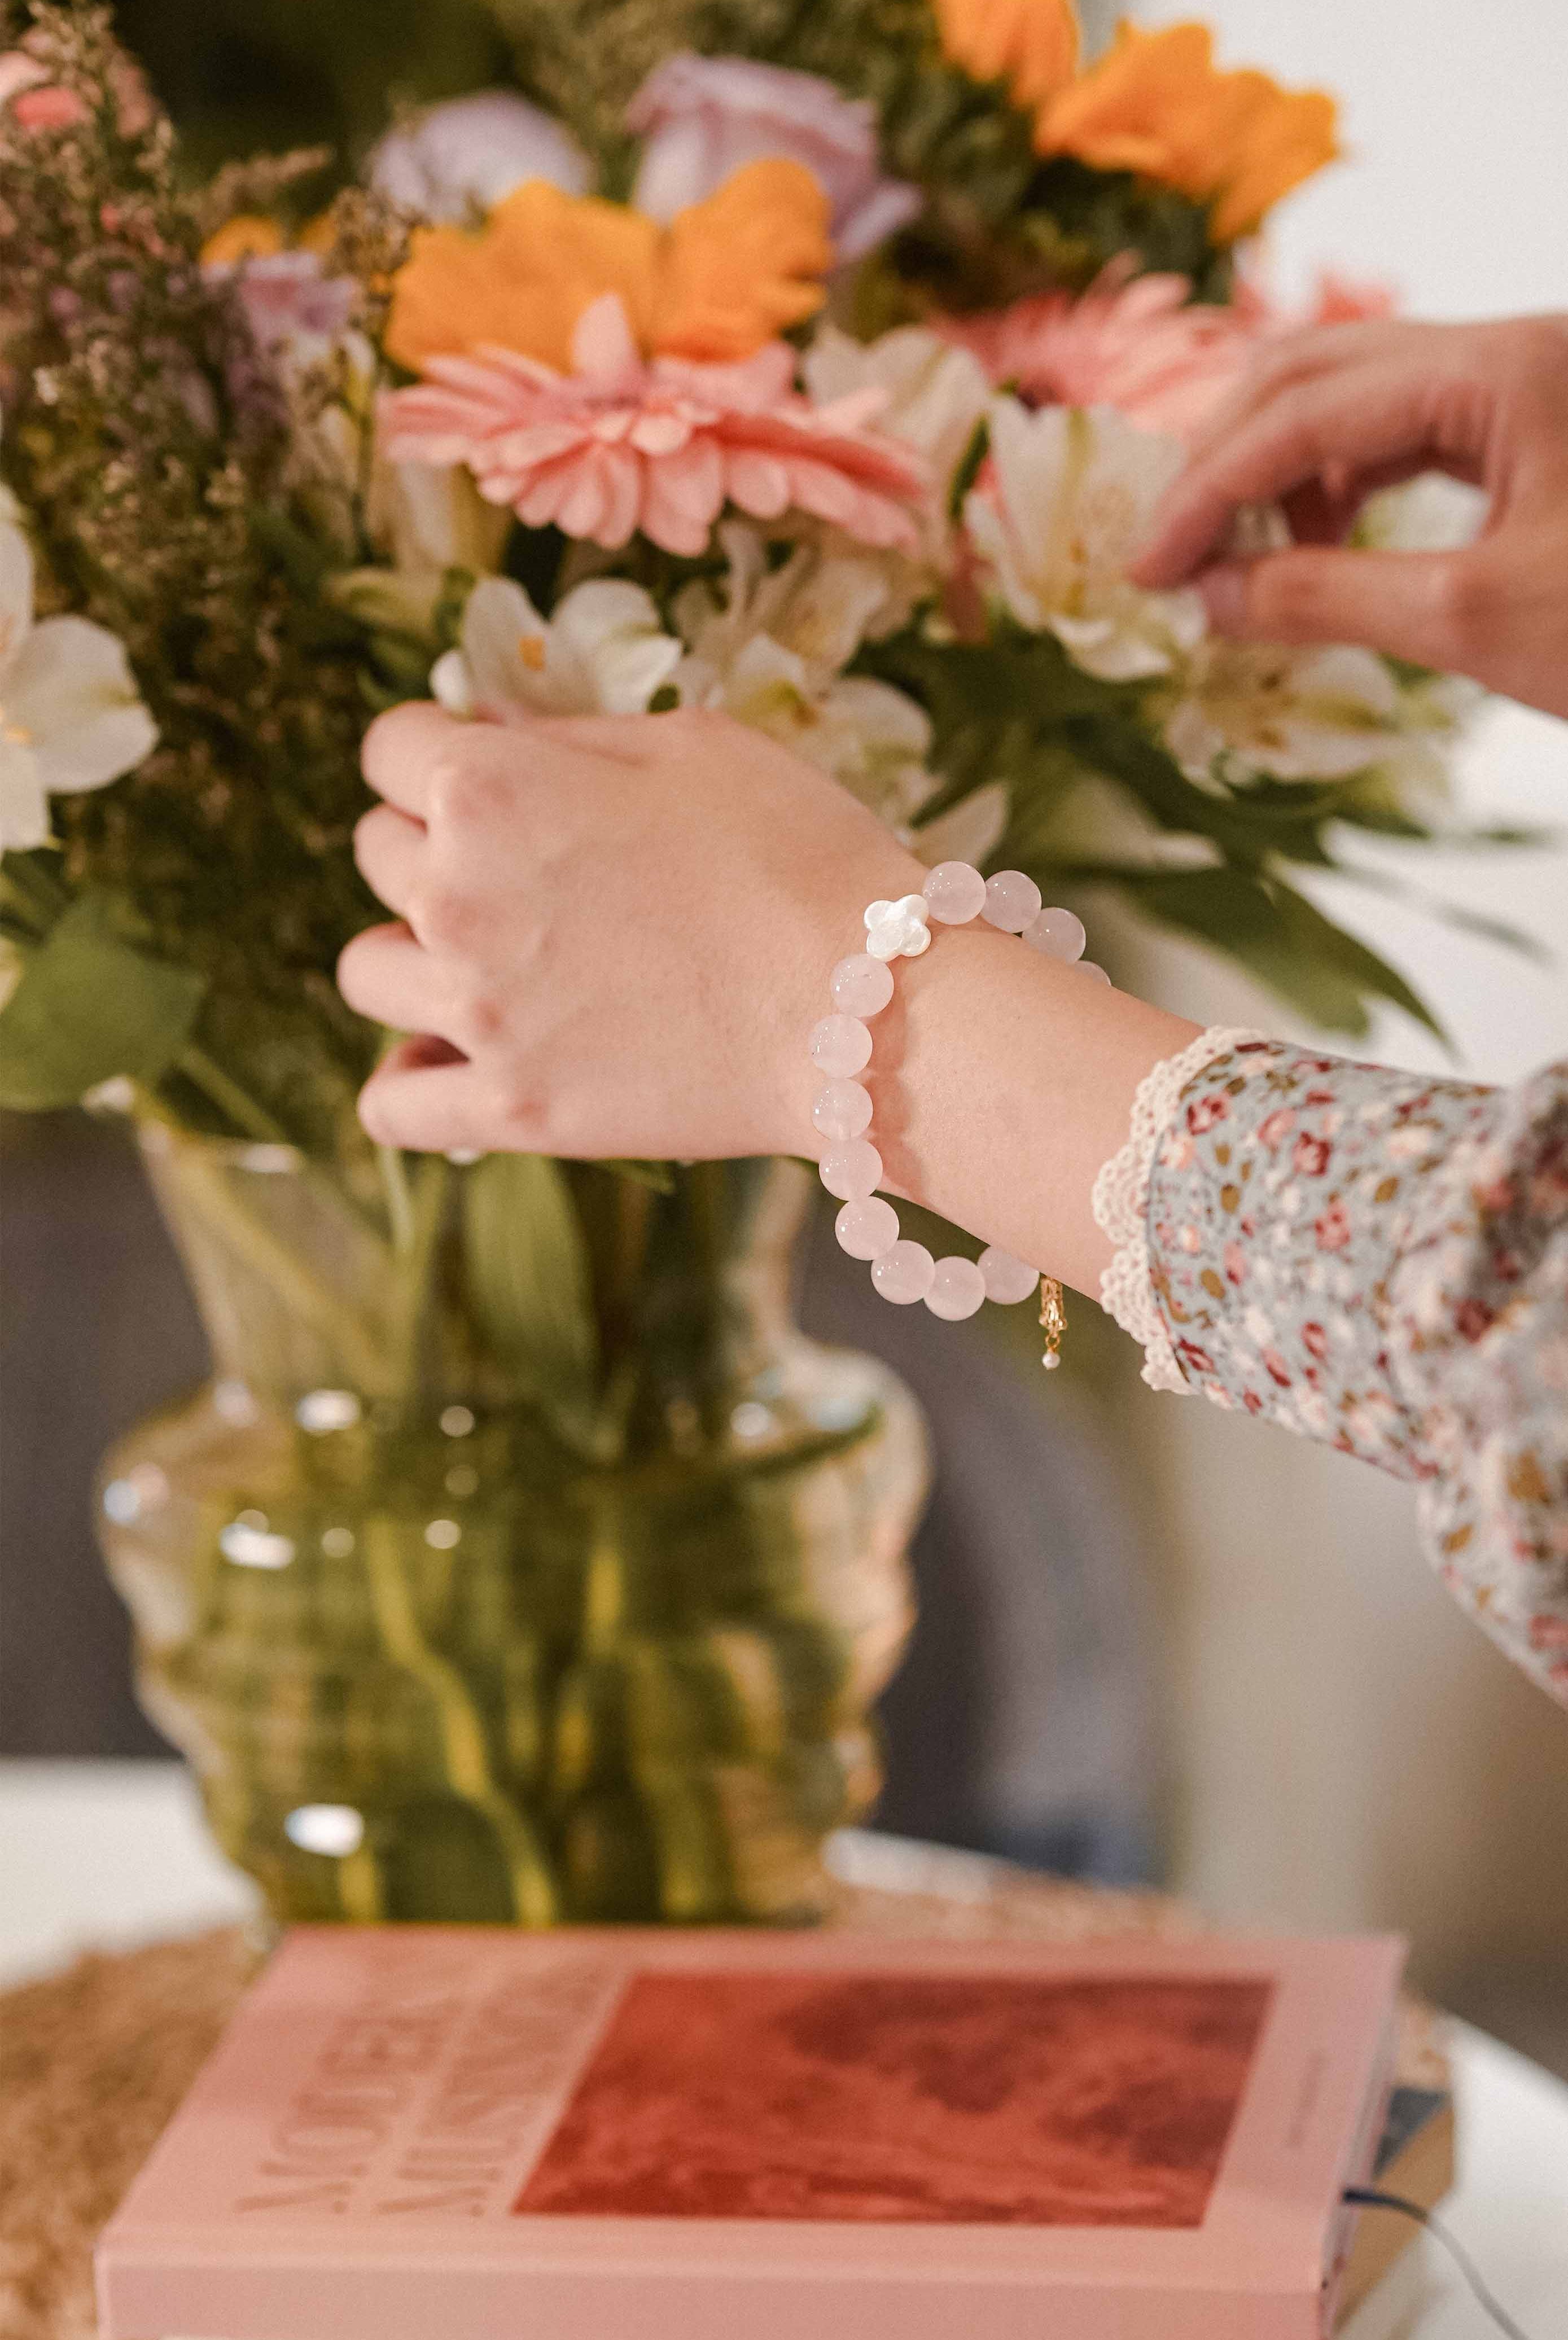 Woman with a white pearl bracelet fluffing up the flowers on the table 